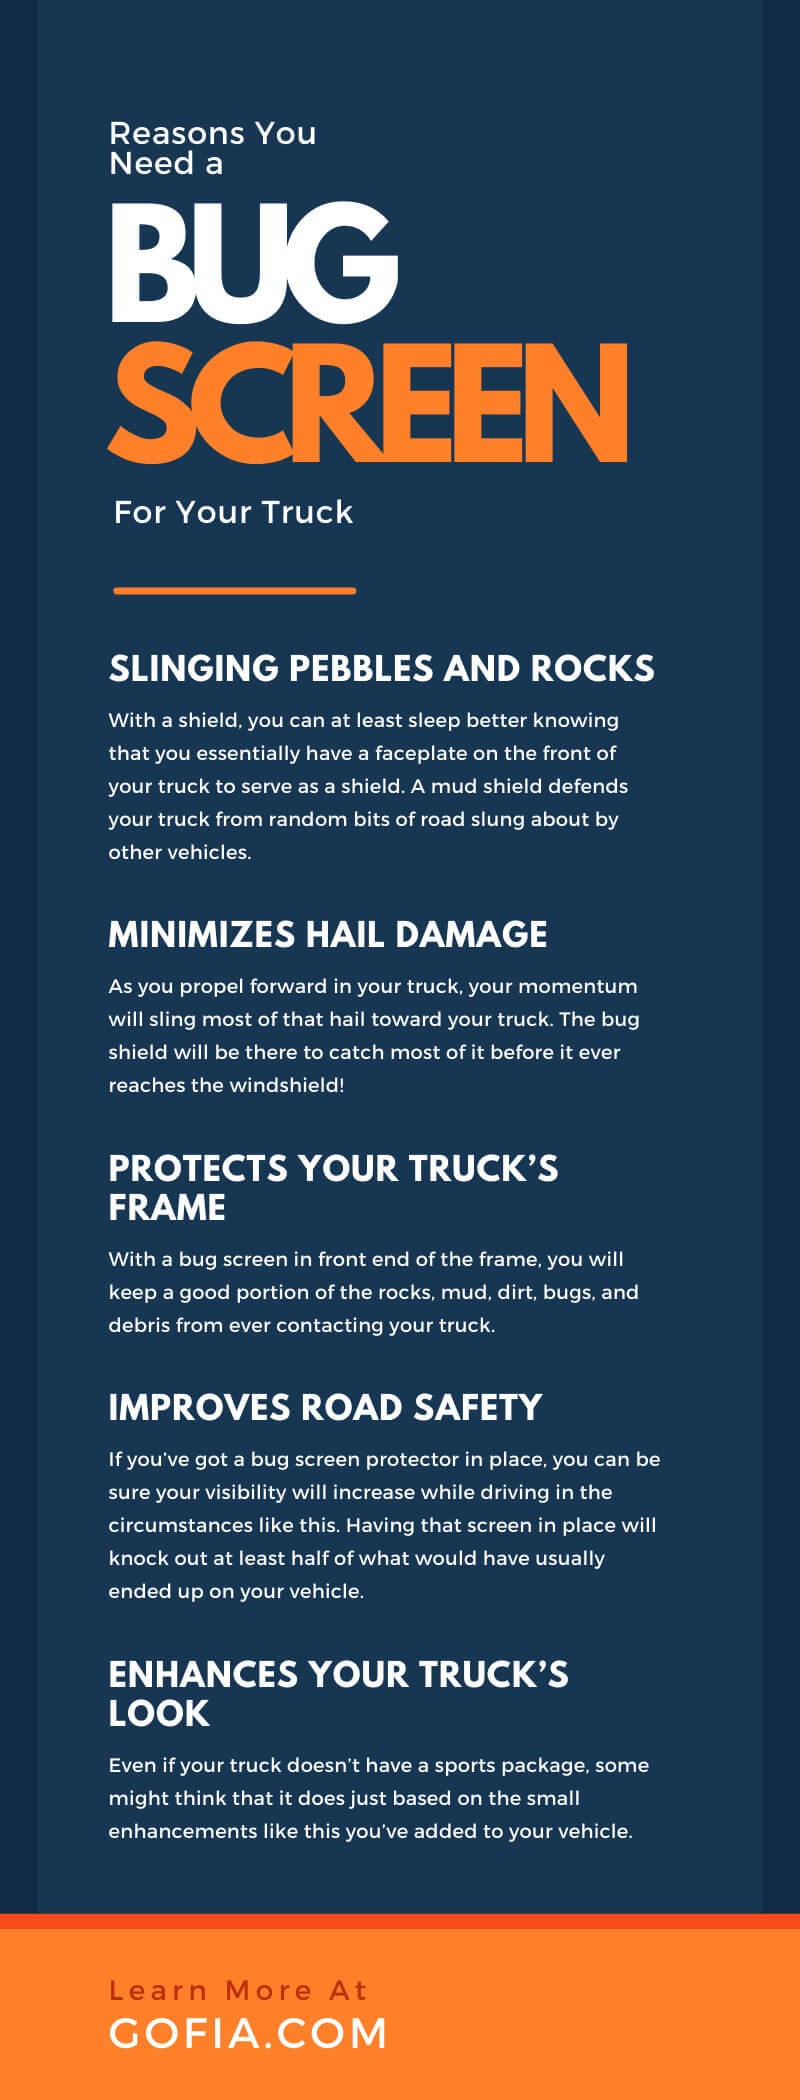 7 Reasons You Need a Bug Screen for Your Truck 